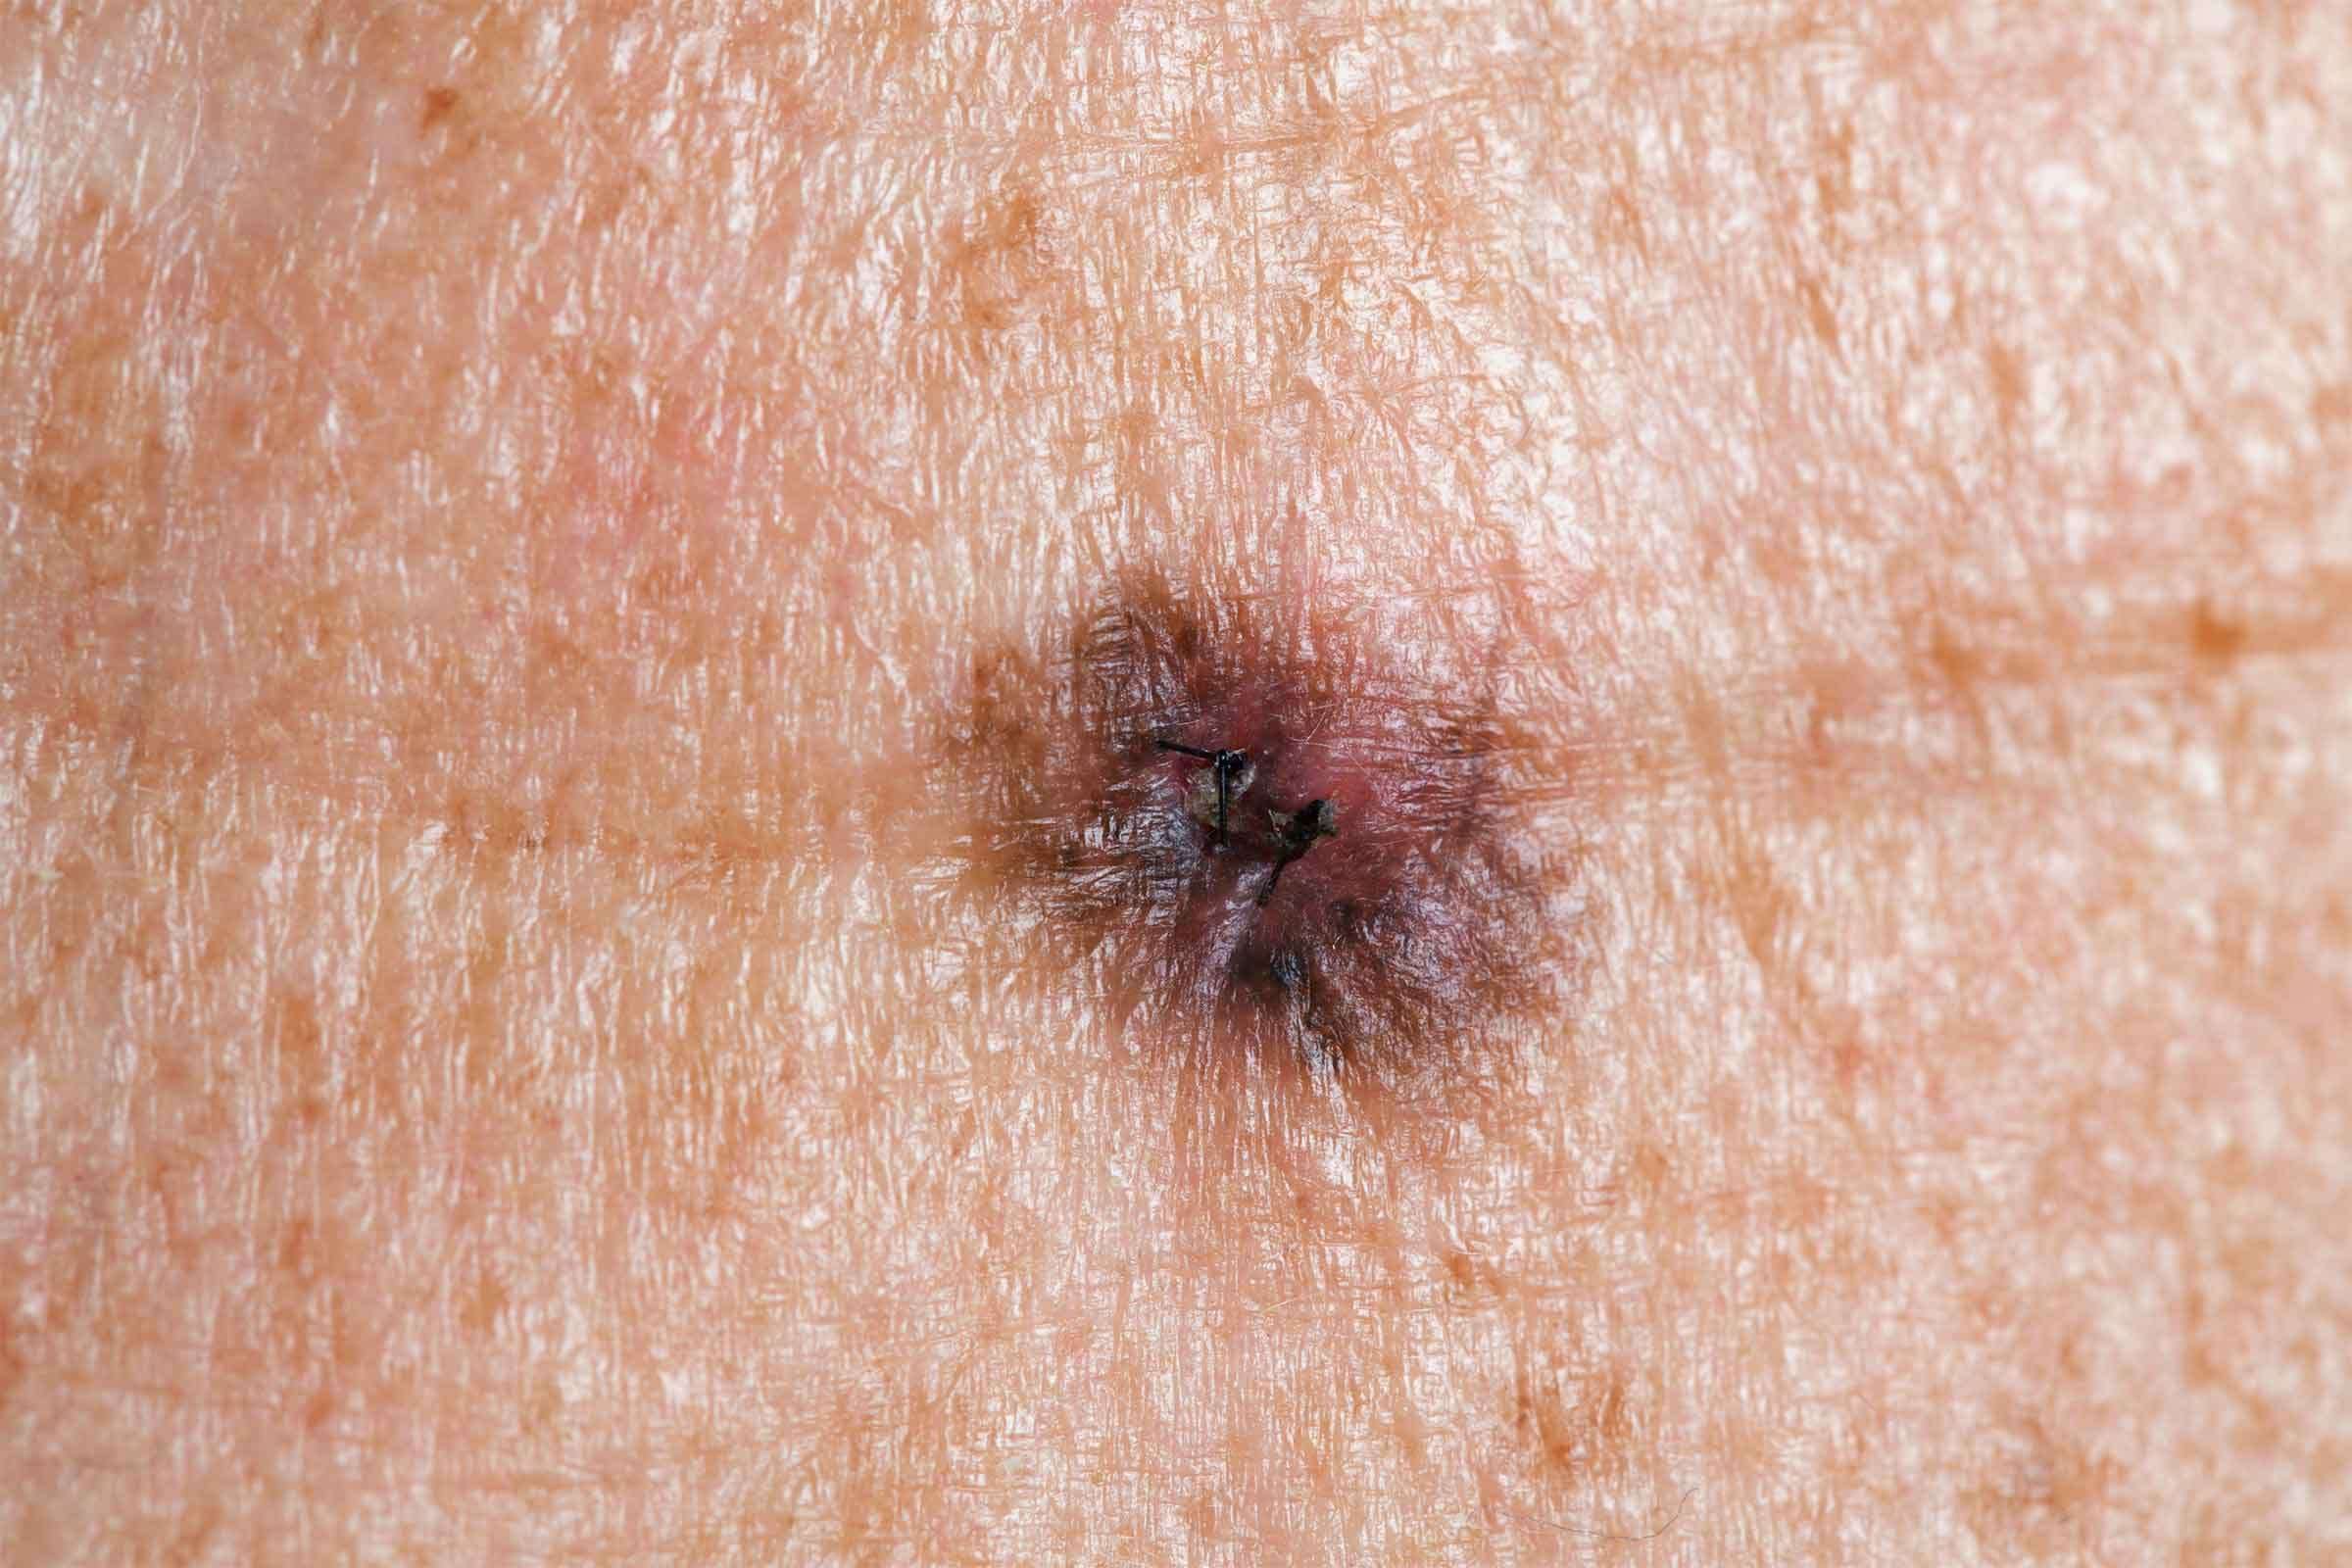 Skin Cancer Symptoms: How to Check for Moles